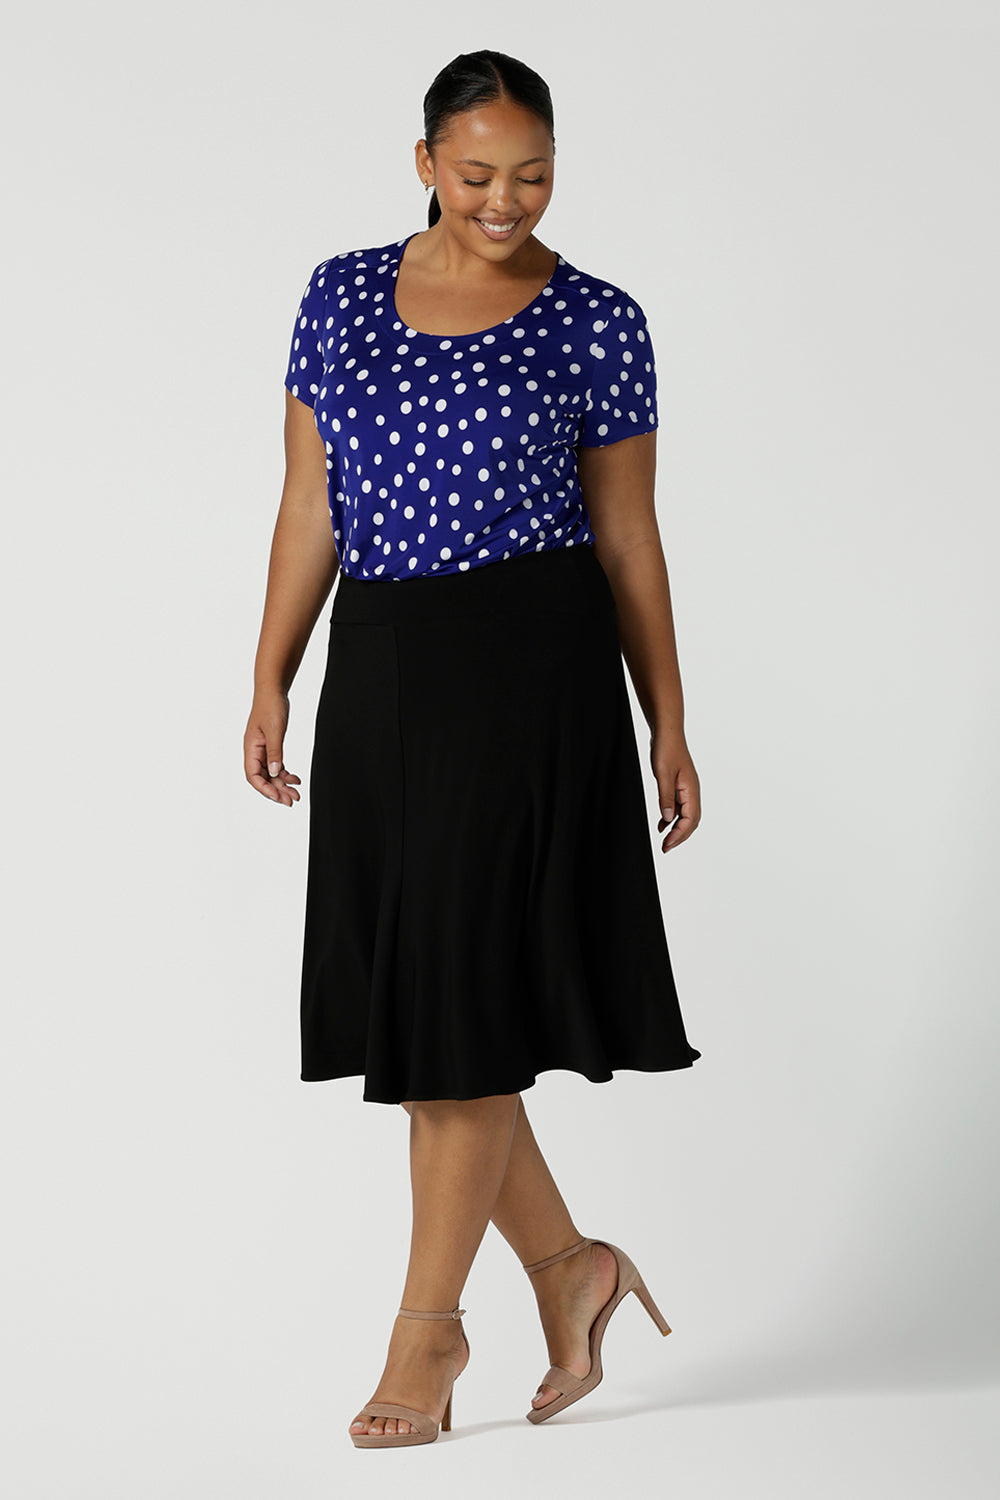 Size 16 curvy woman wears the Sawyer top a scoop neckline top on a polka dot print with a cobalt base. Styled back with a black Cassidy skirt.Made in Australia for women size 8 to 24.